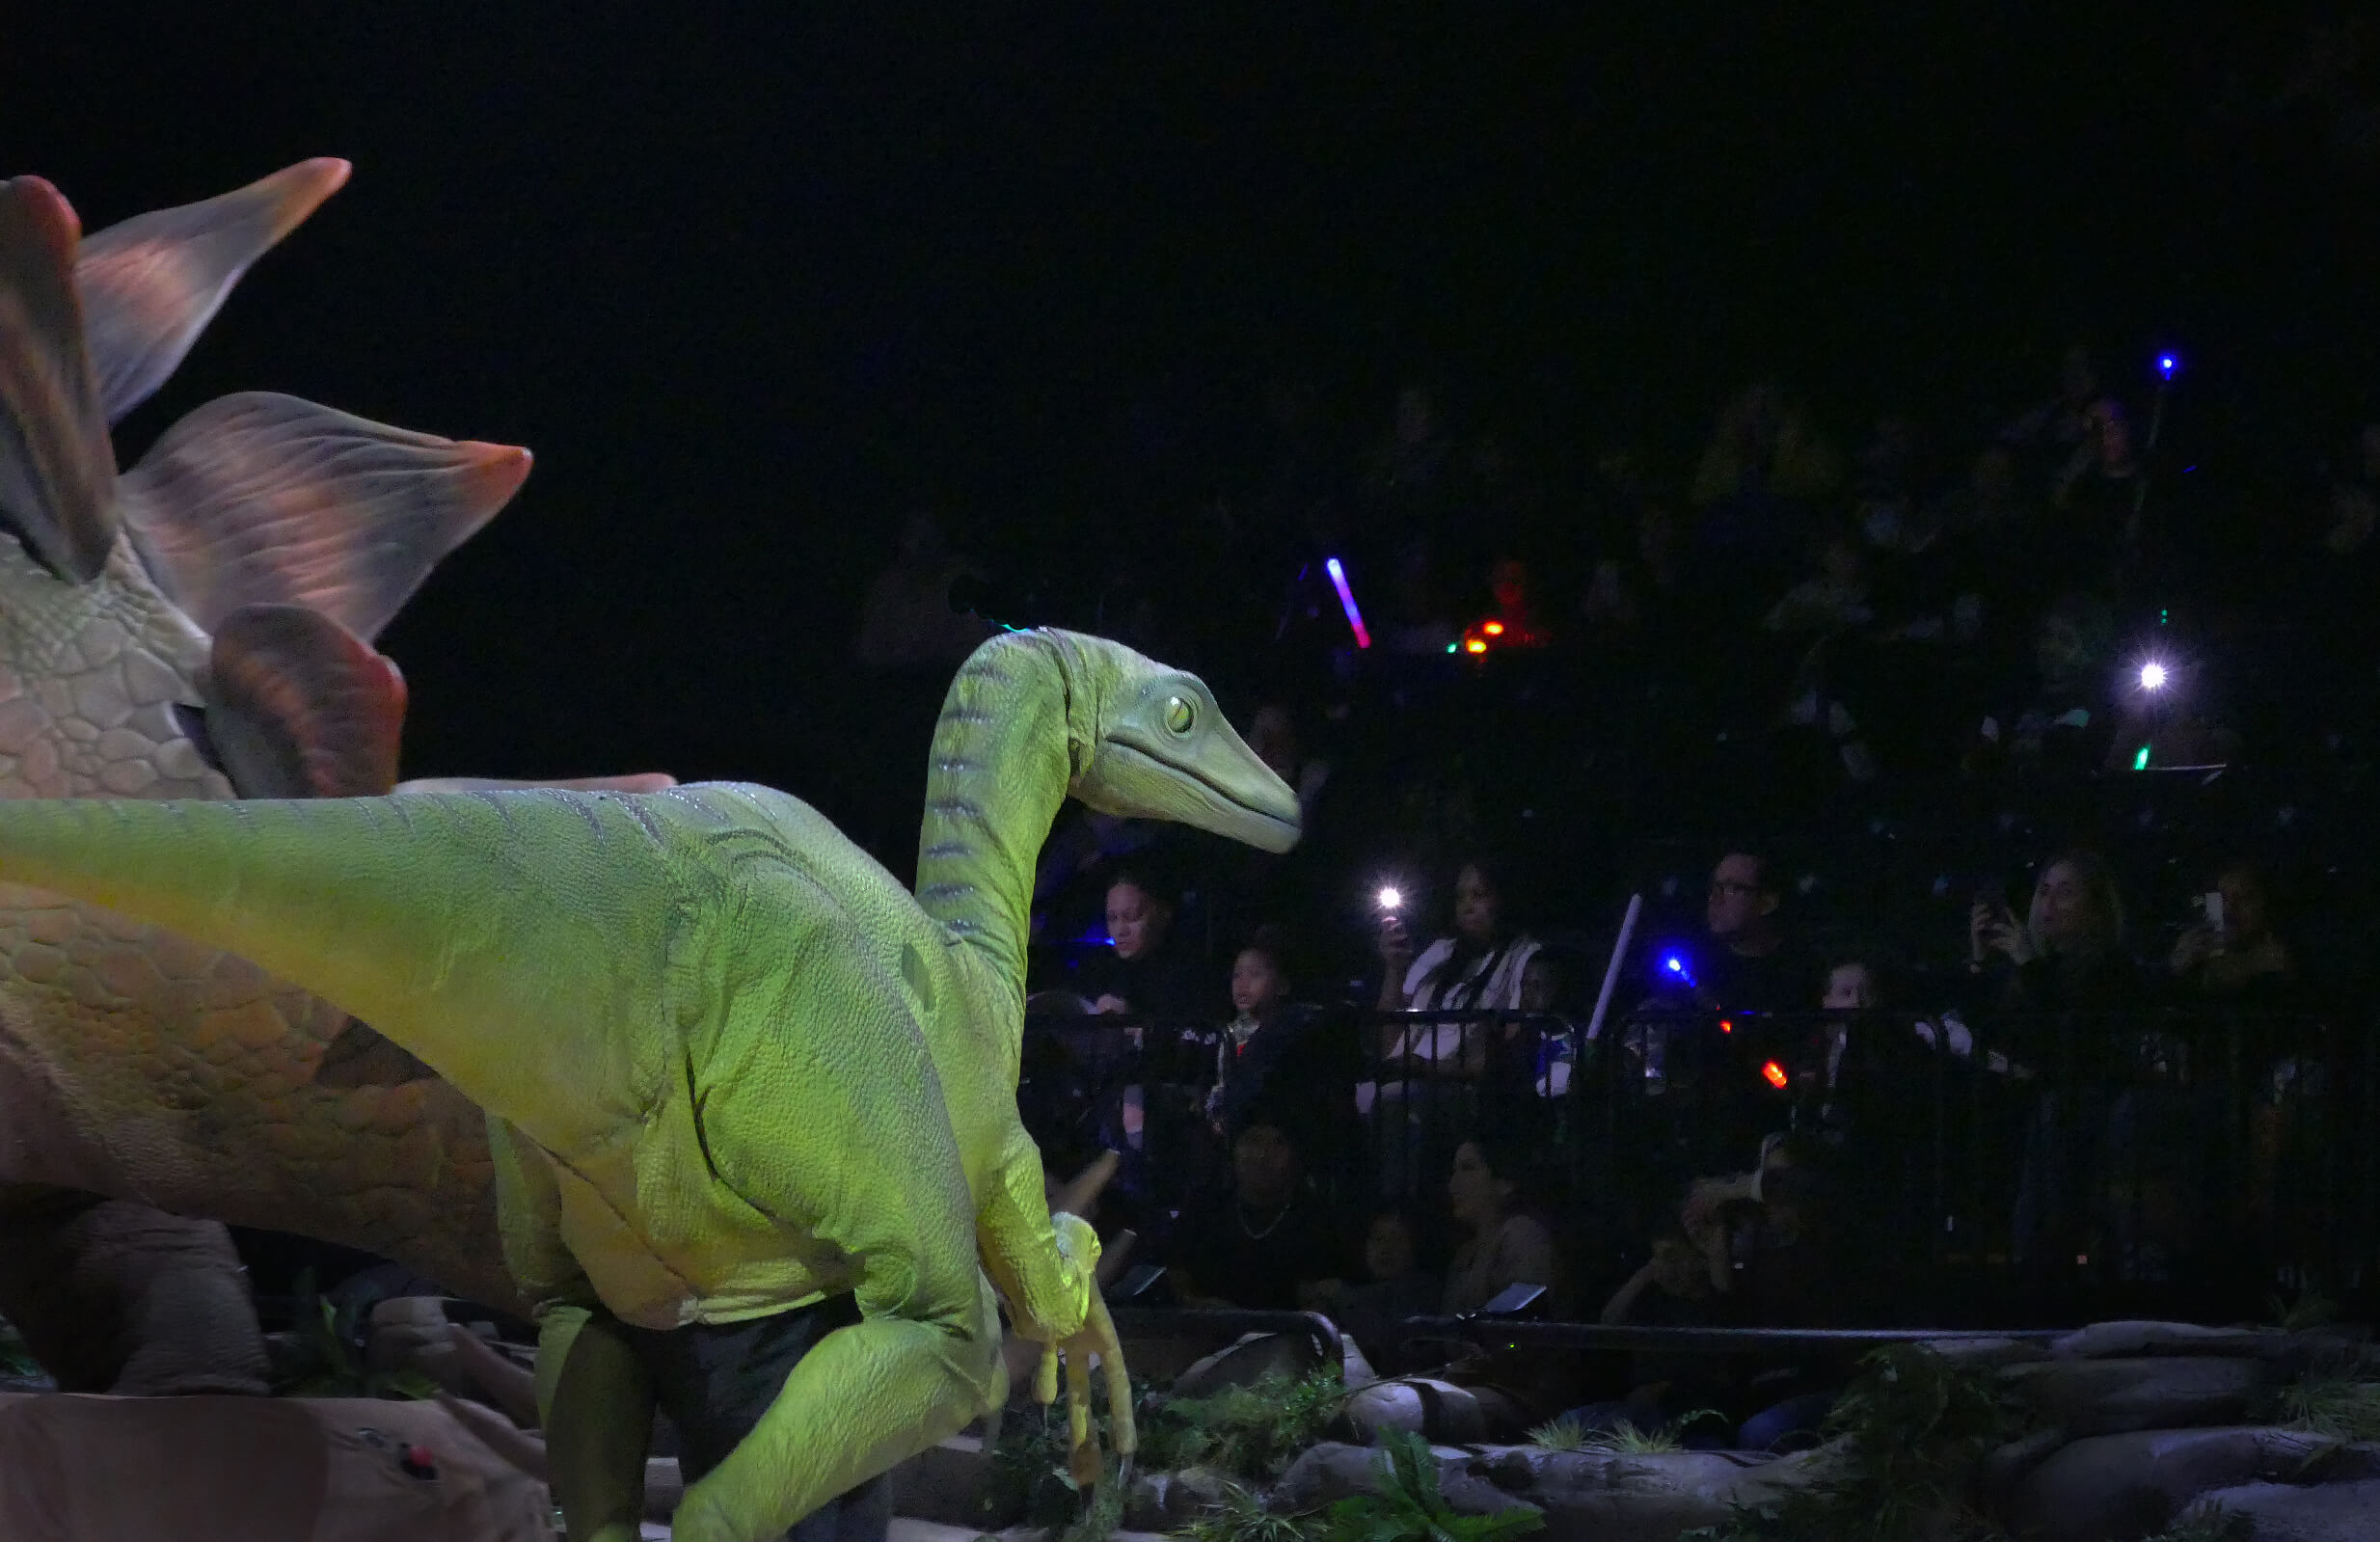 4 Barclays Center Jurassic World Live A Raptor stares at the audience in a menacing manner 22423 Joe Abate